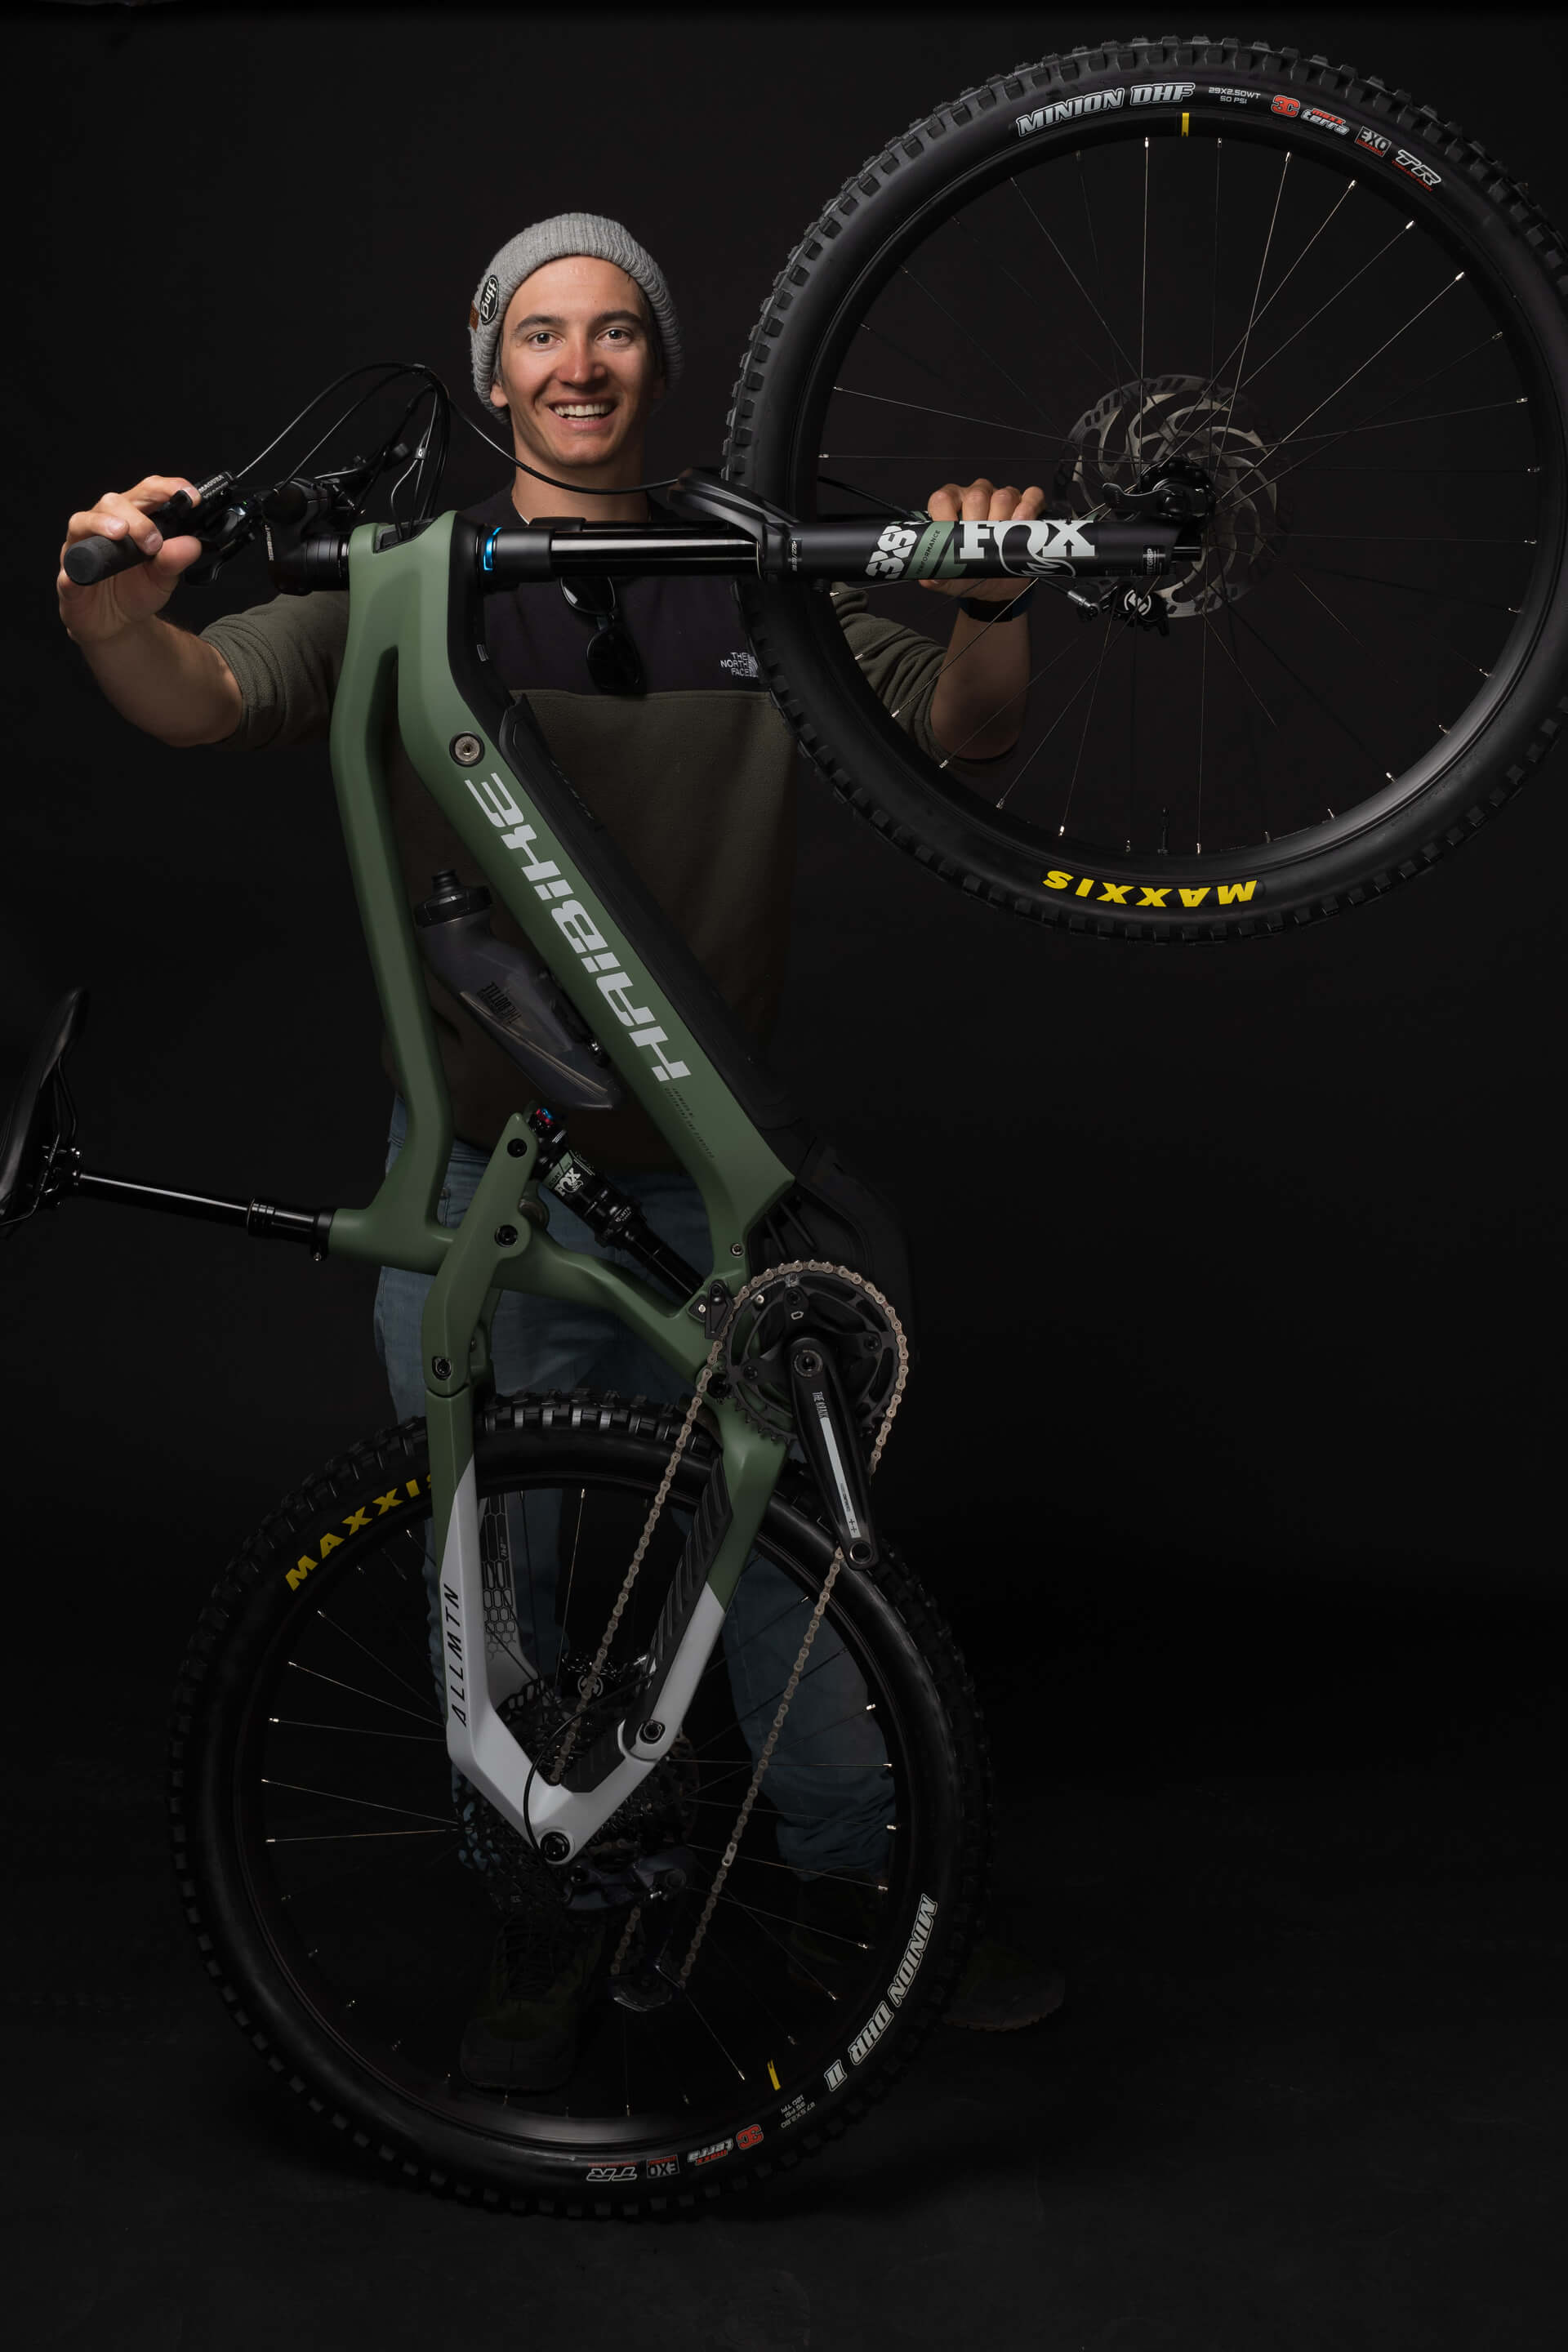 Portrait image of Haibike Hero Victor Delerue with his Haibike AllMtn 6 in front of a black background